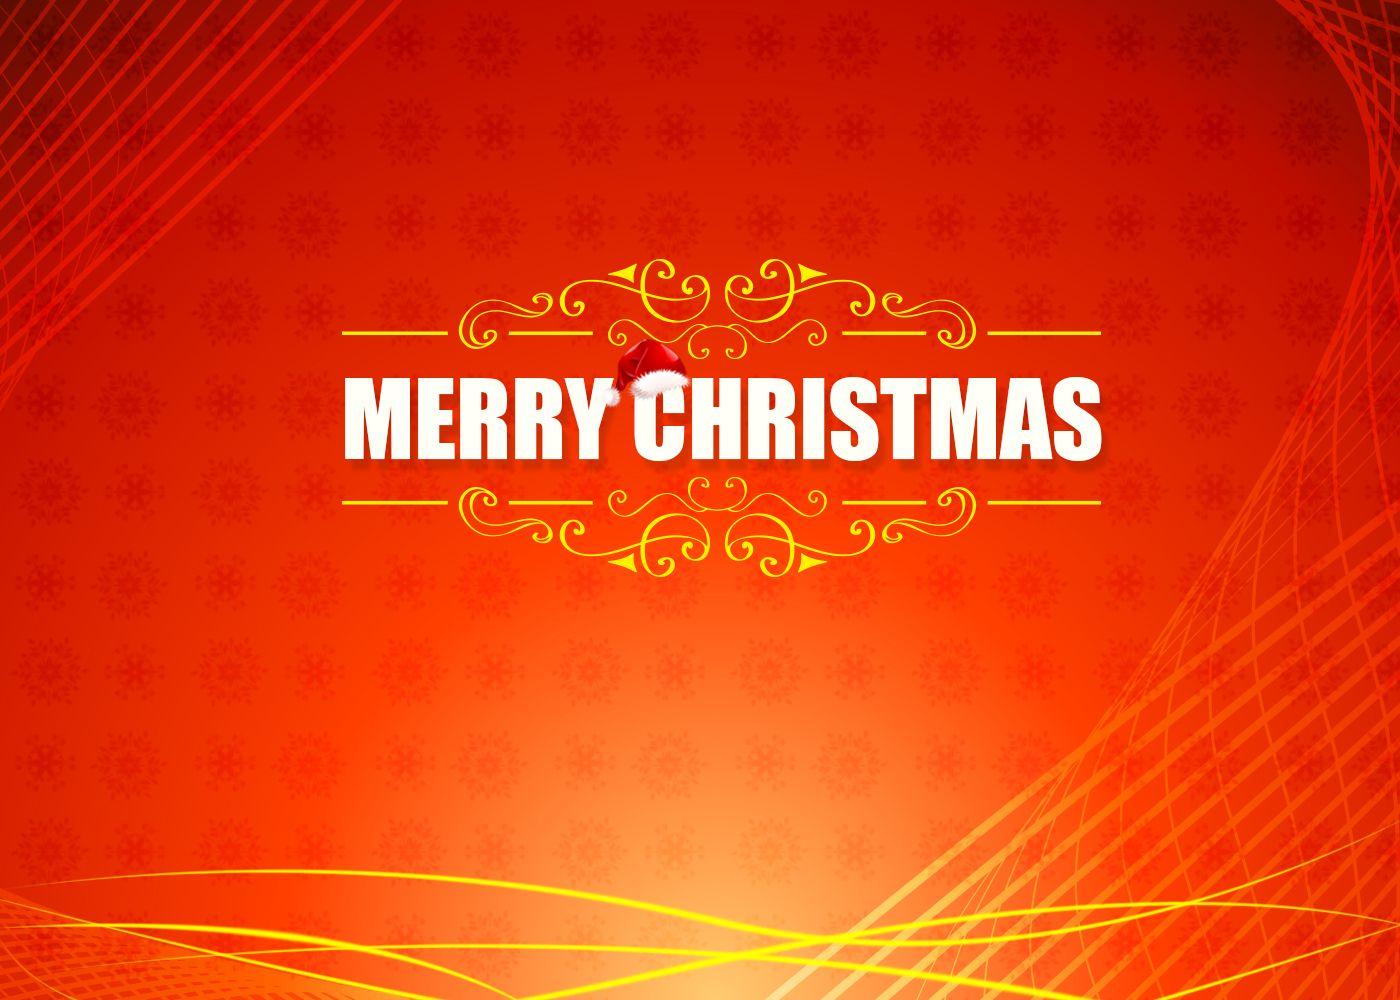 Free Merry Christmas Wallpaper and Desktop Background